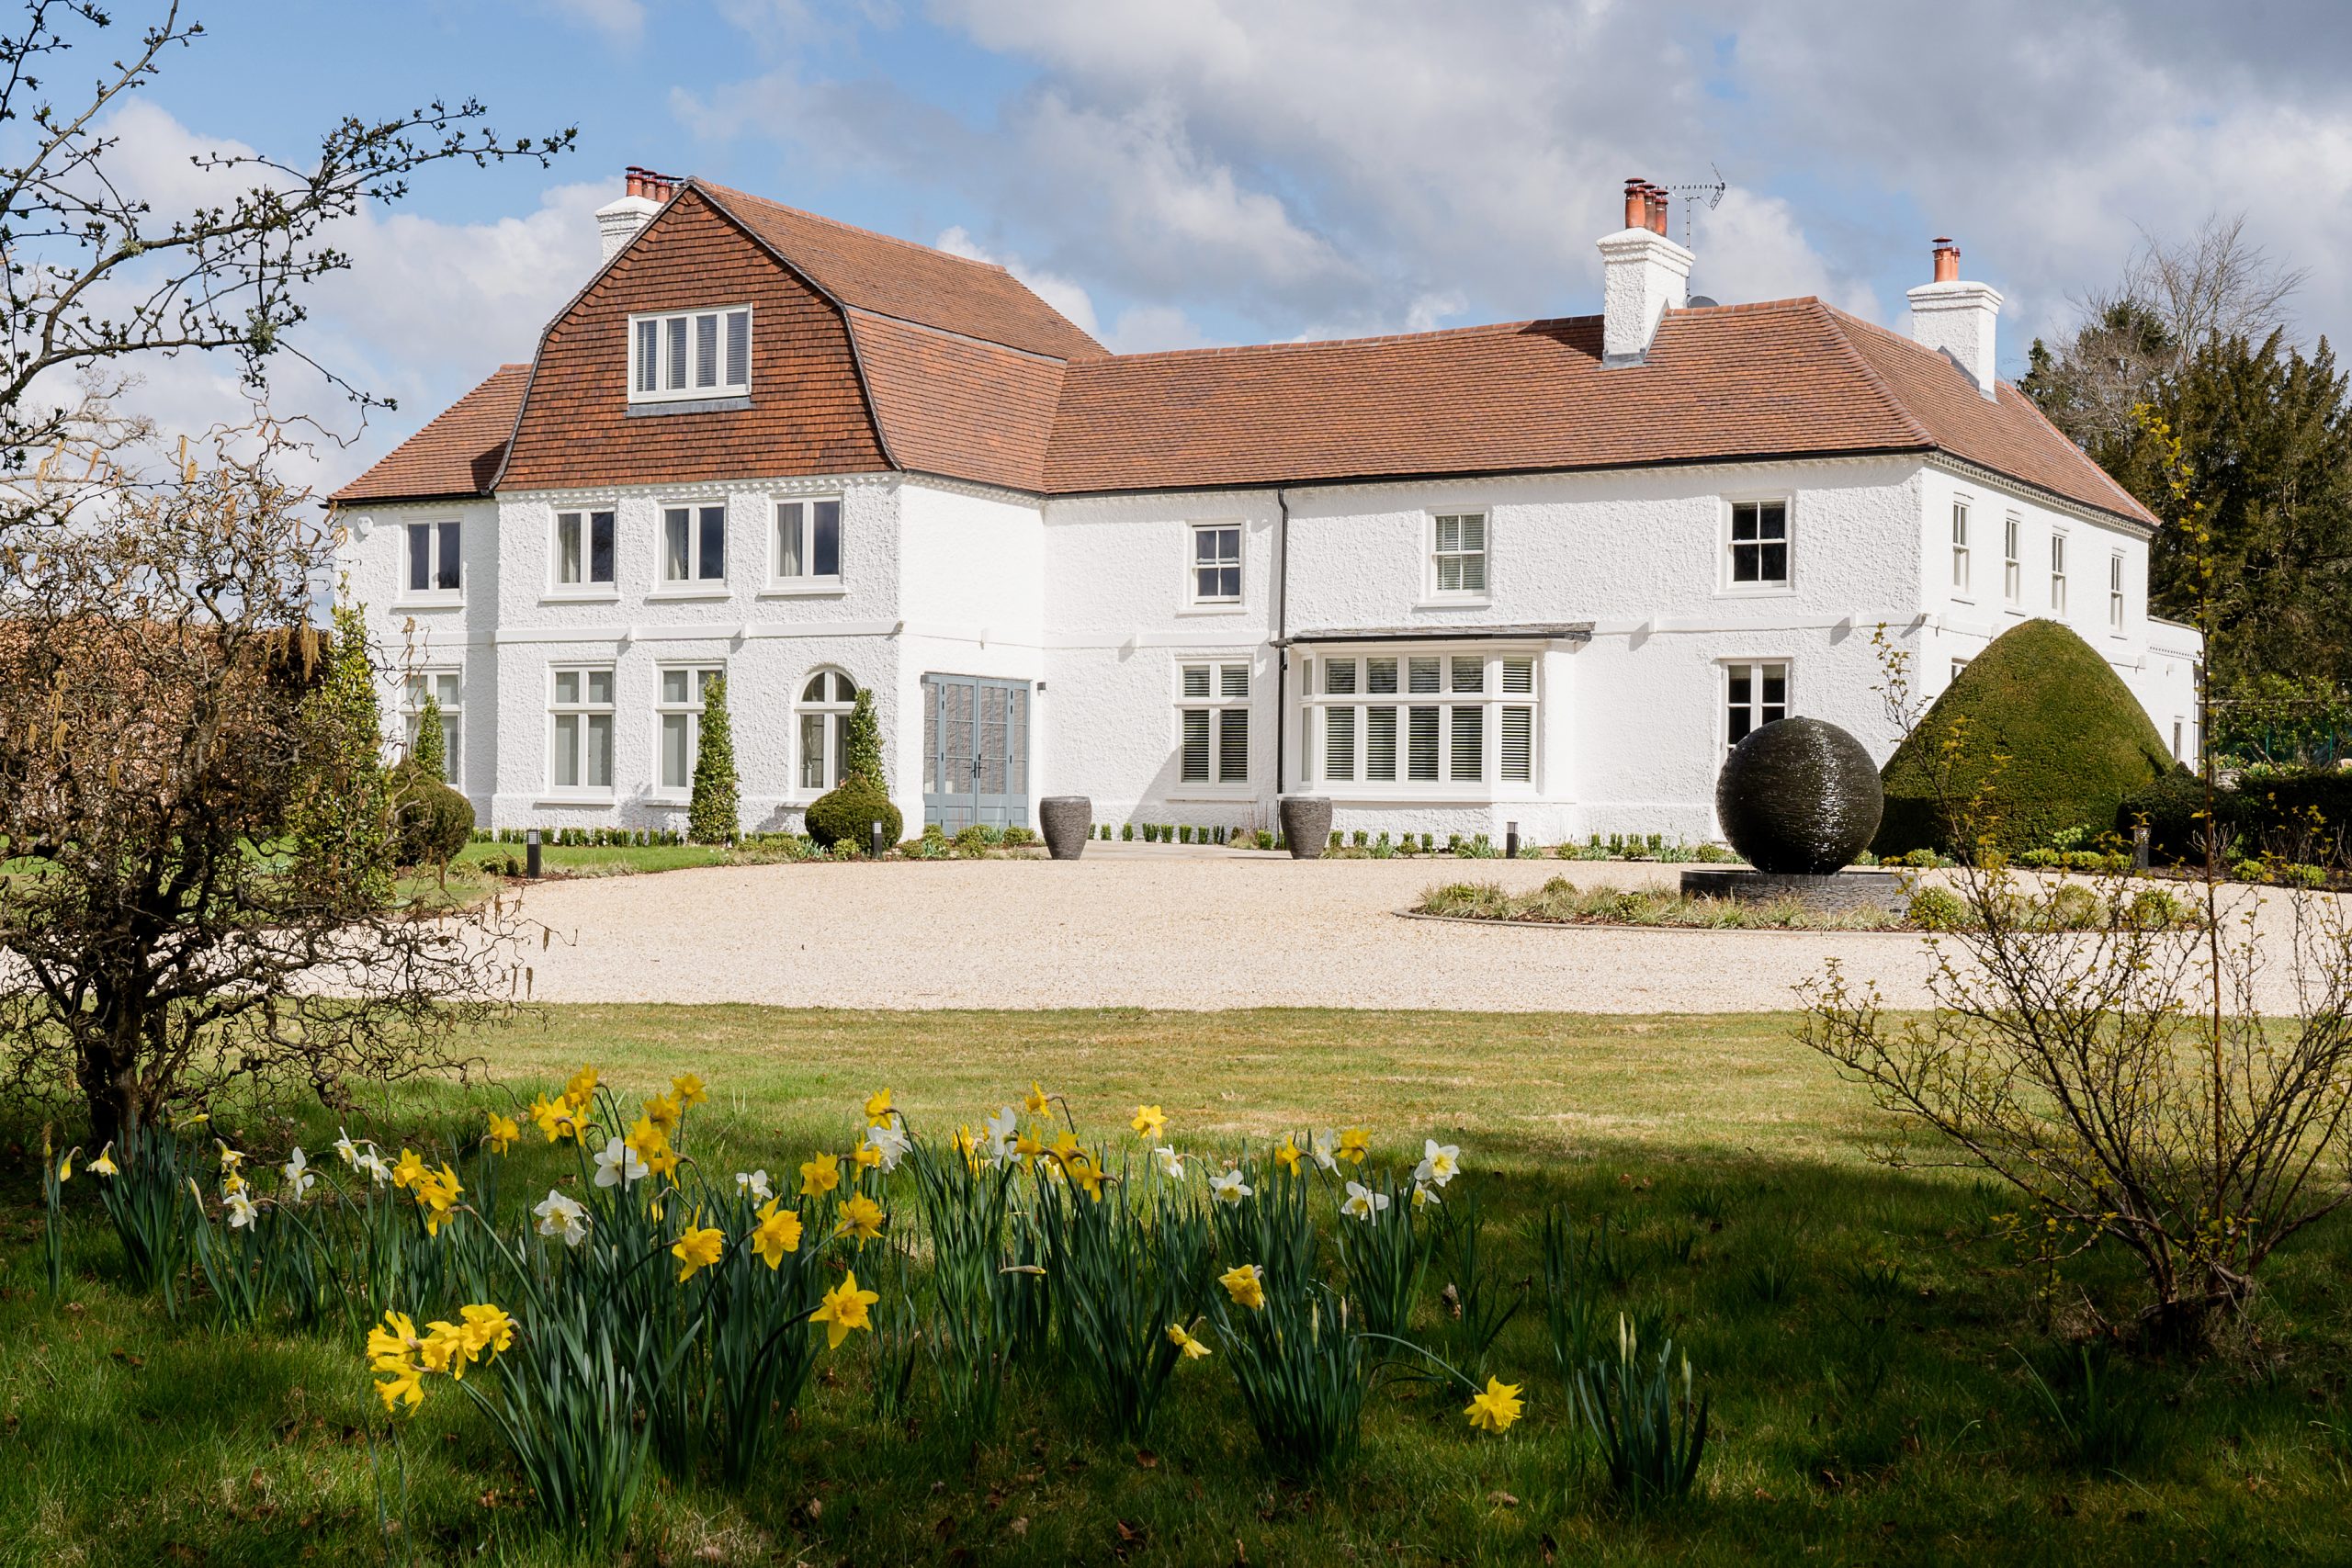 large white country house in background with daffodils in foreground